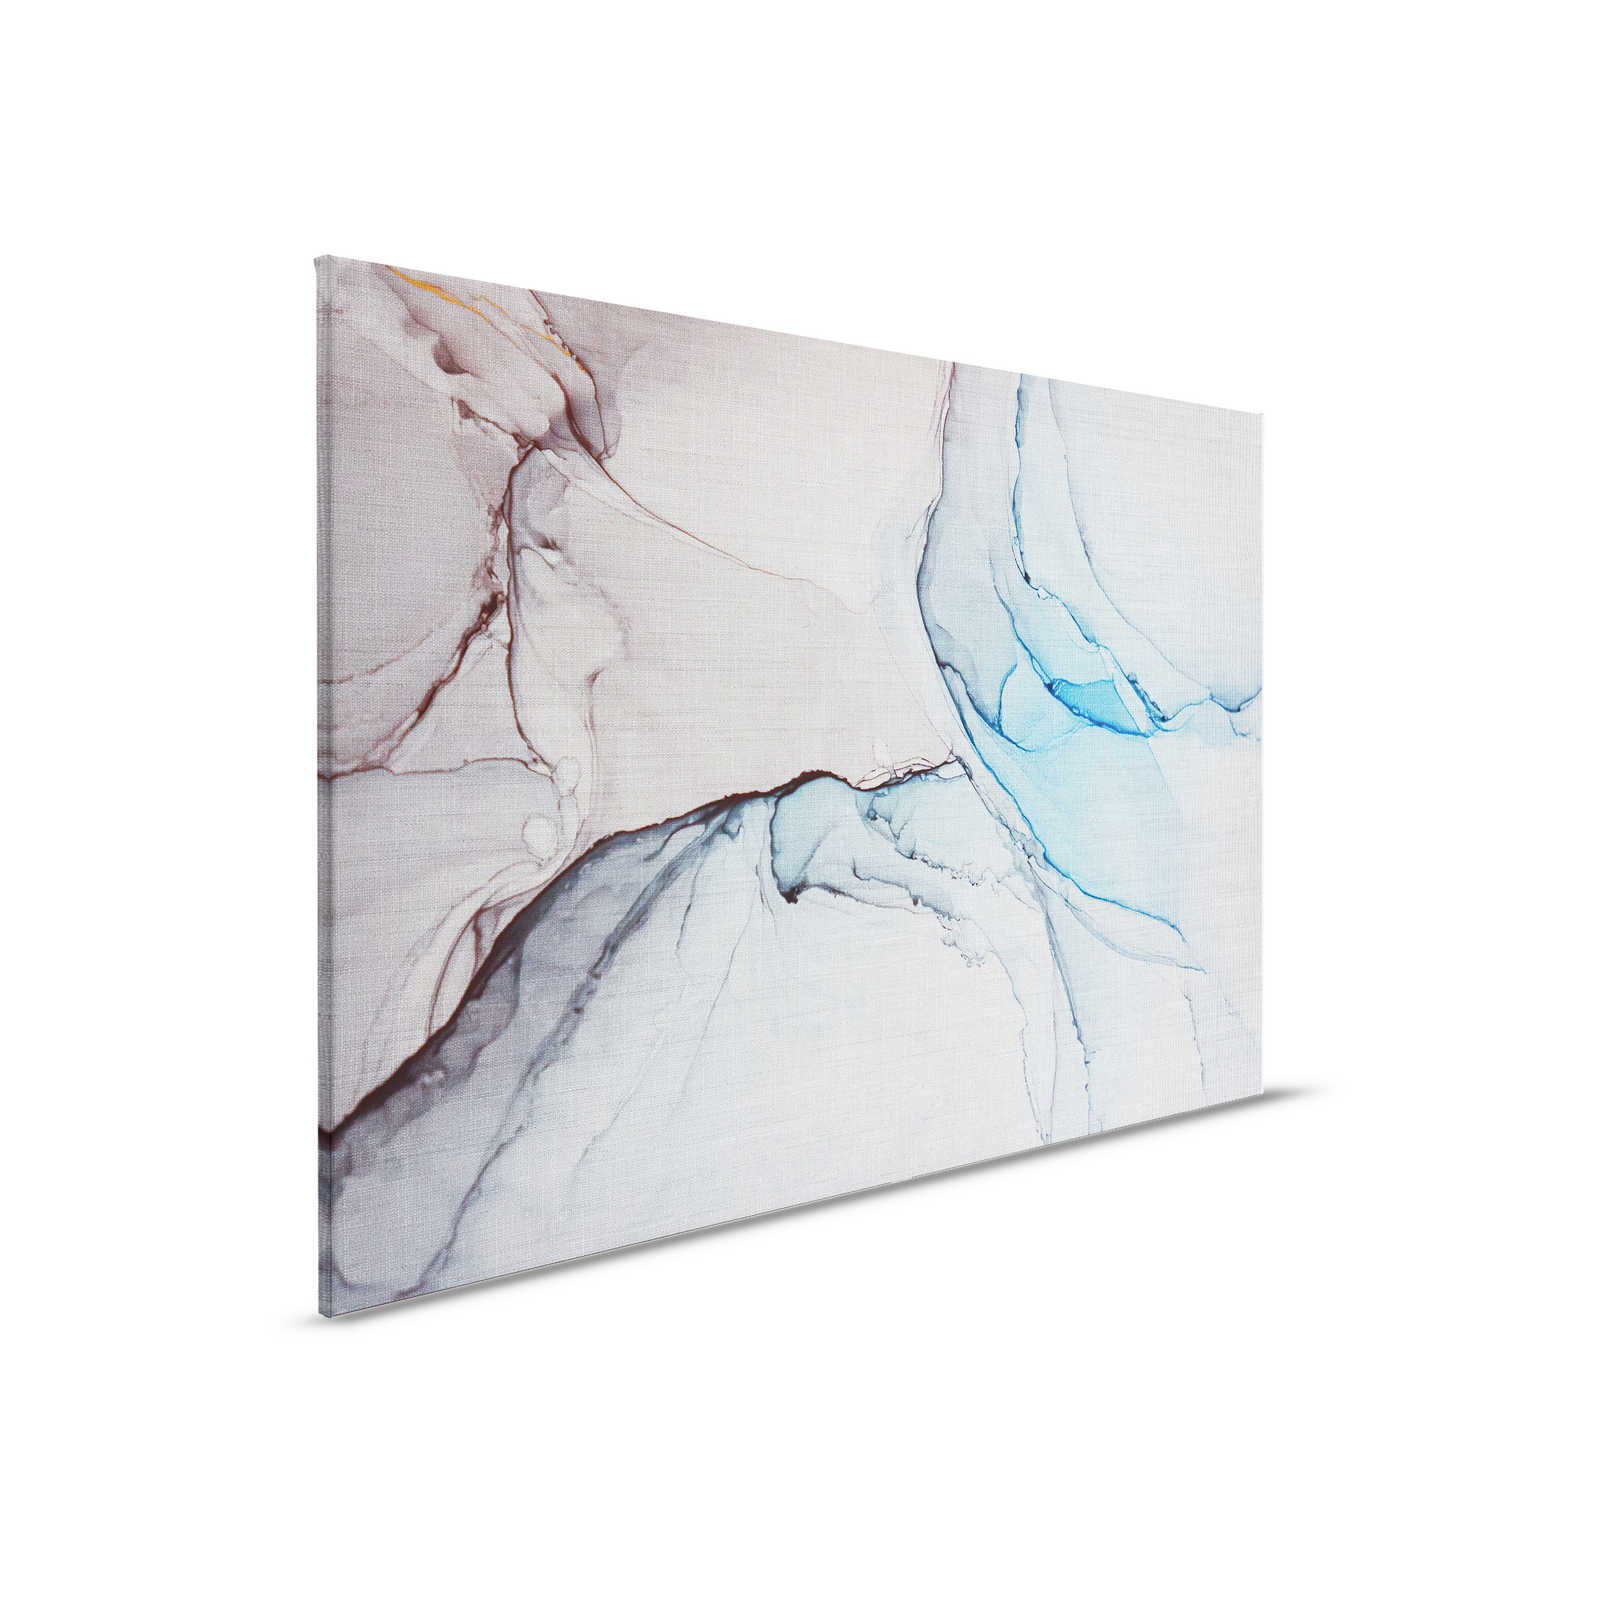         Canvas painting with marble pattern in linen look - 0.90 m x 0.60 m
    